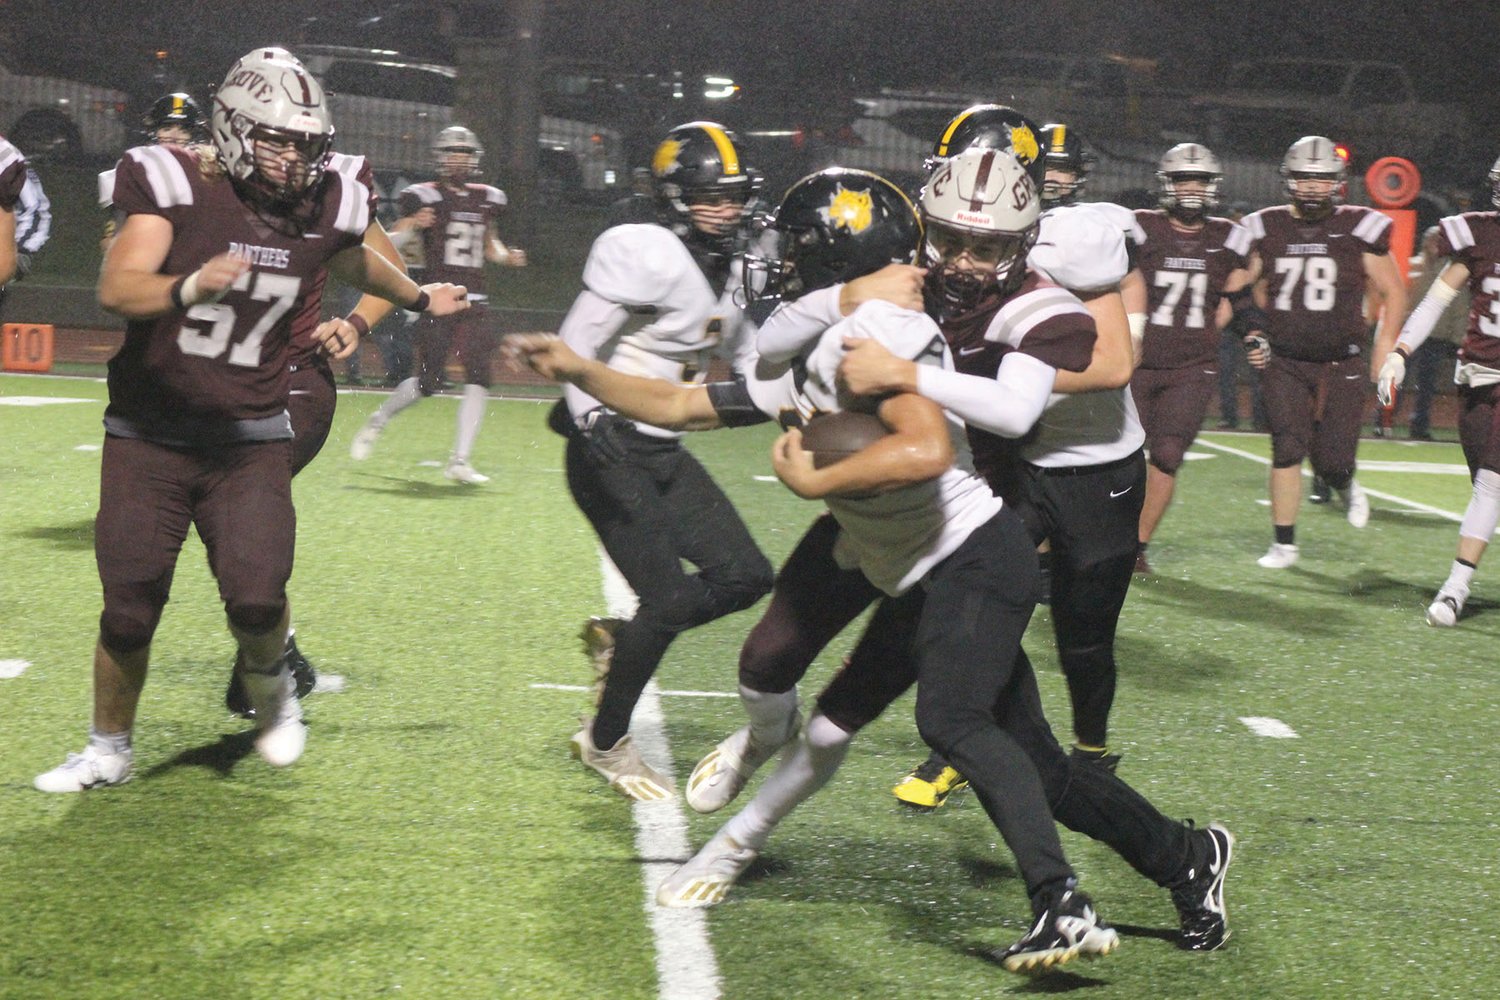 Mountain Grove’s Bryce Stenzel stops a Cassville runner in his tracks.